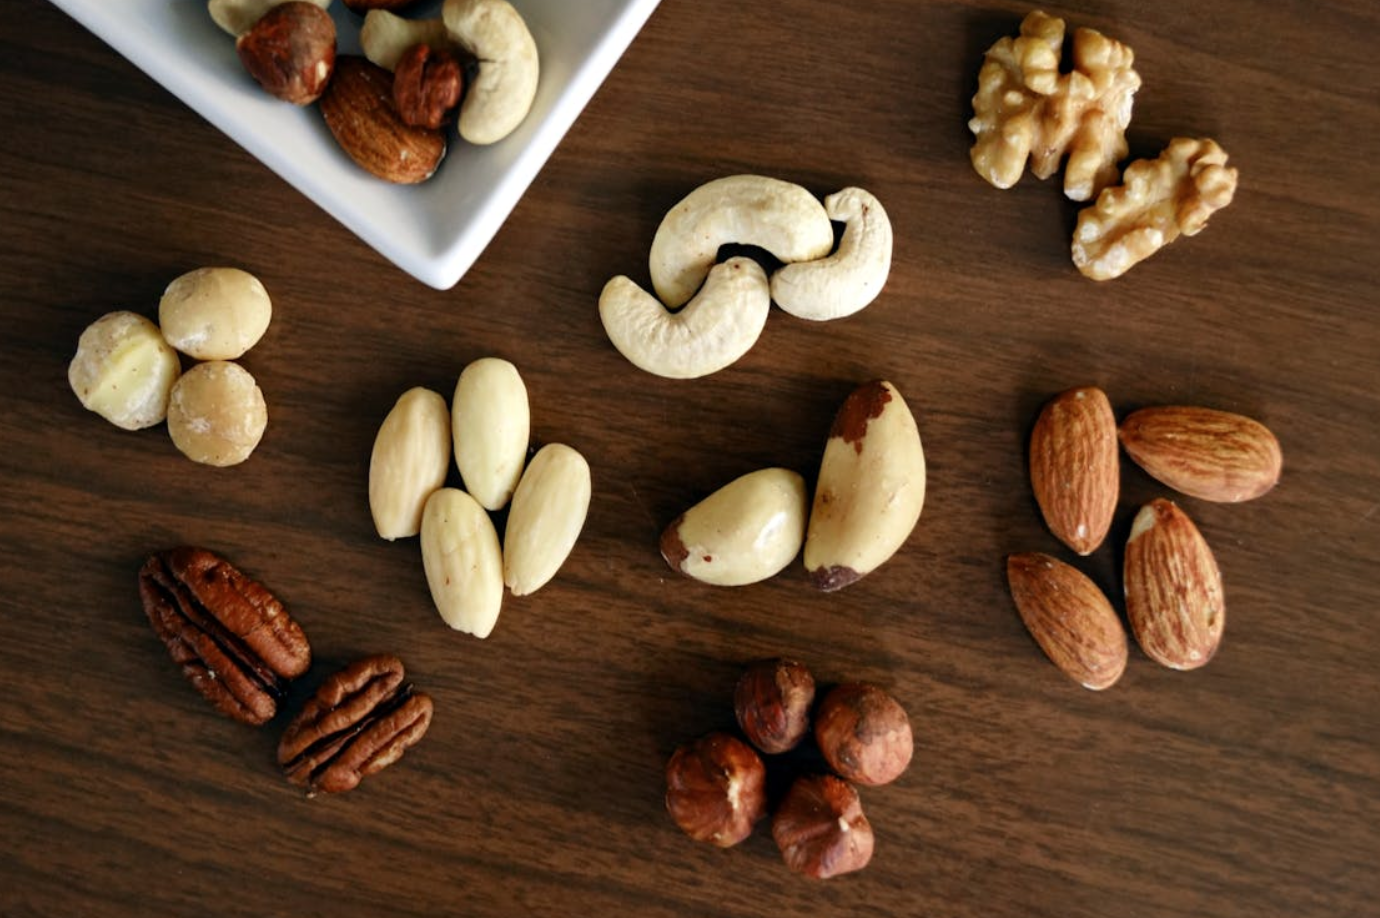 Variety of brown nuts on a wooden table; image by Marta Branco, via Pexels.com.